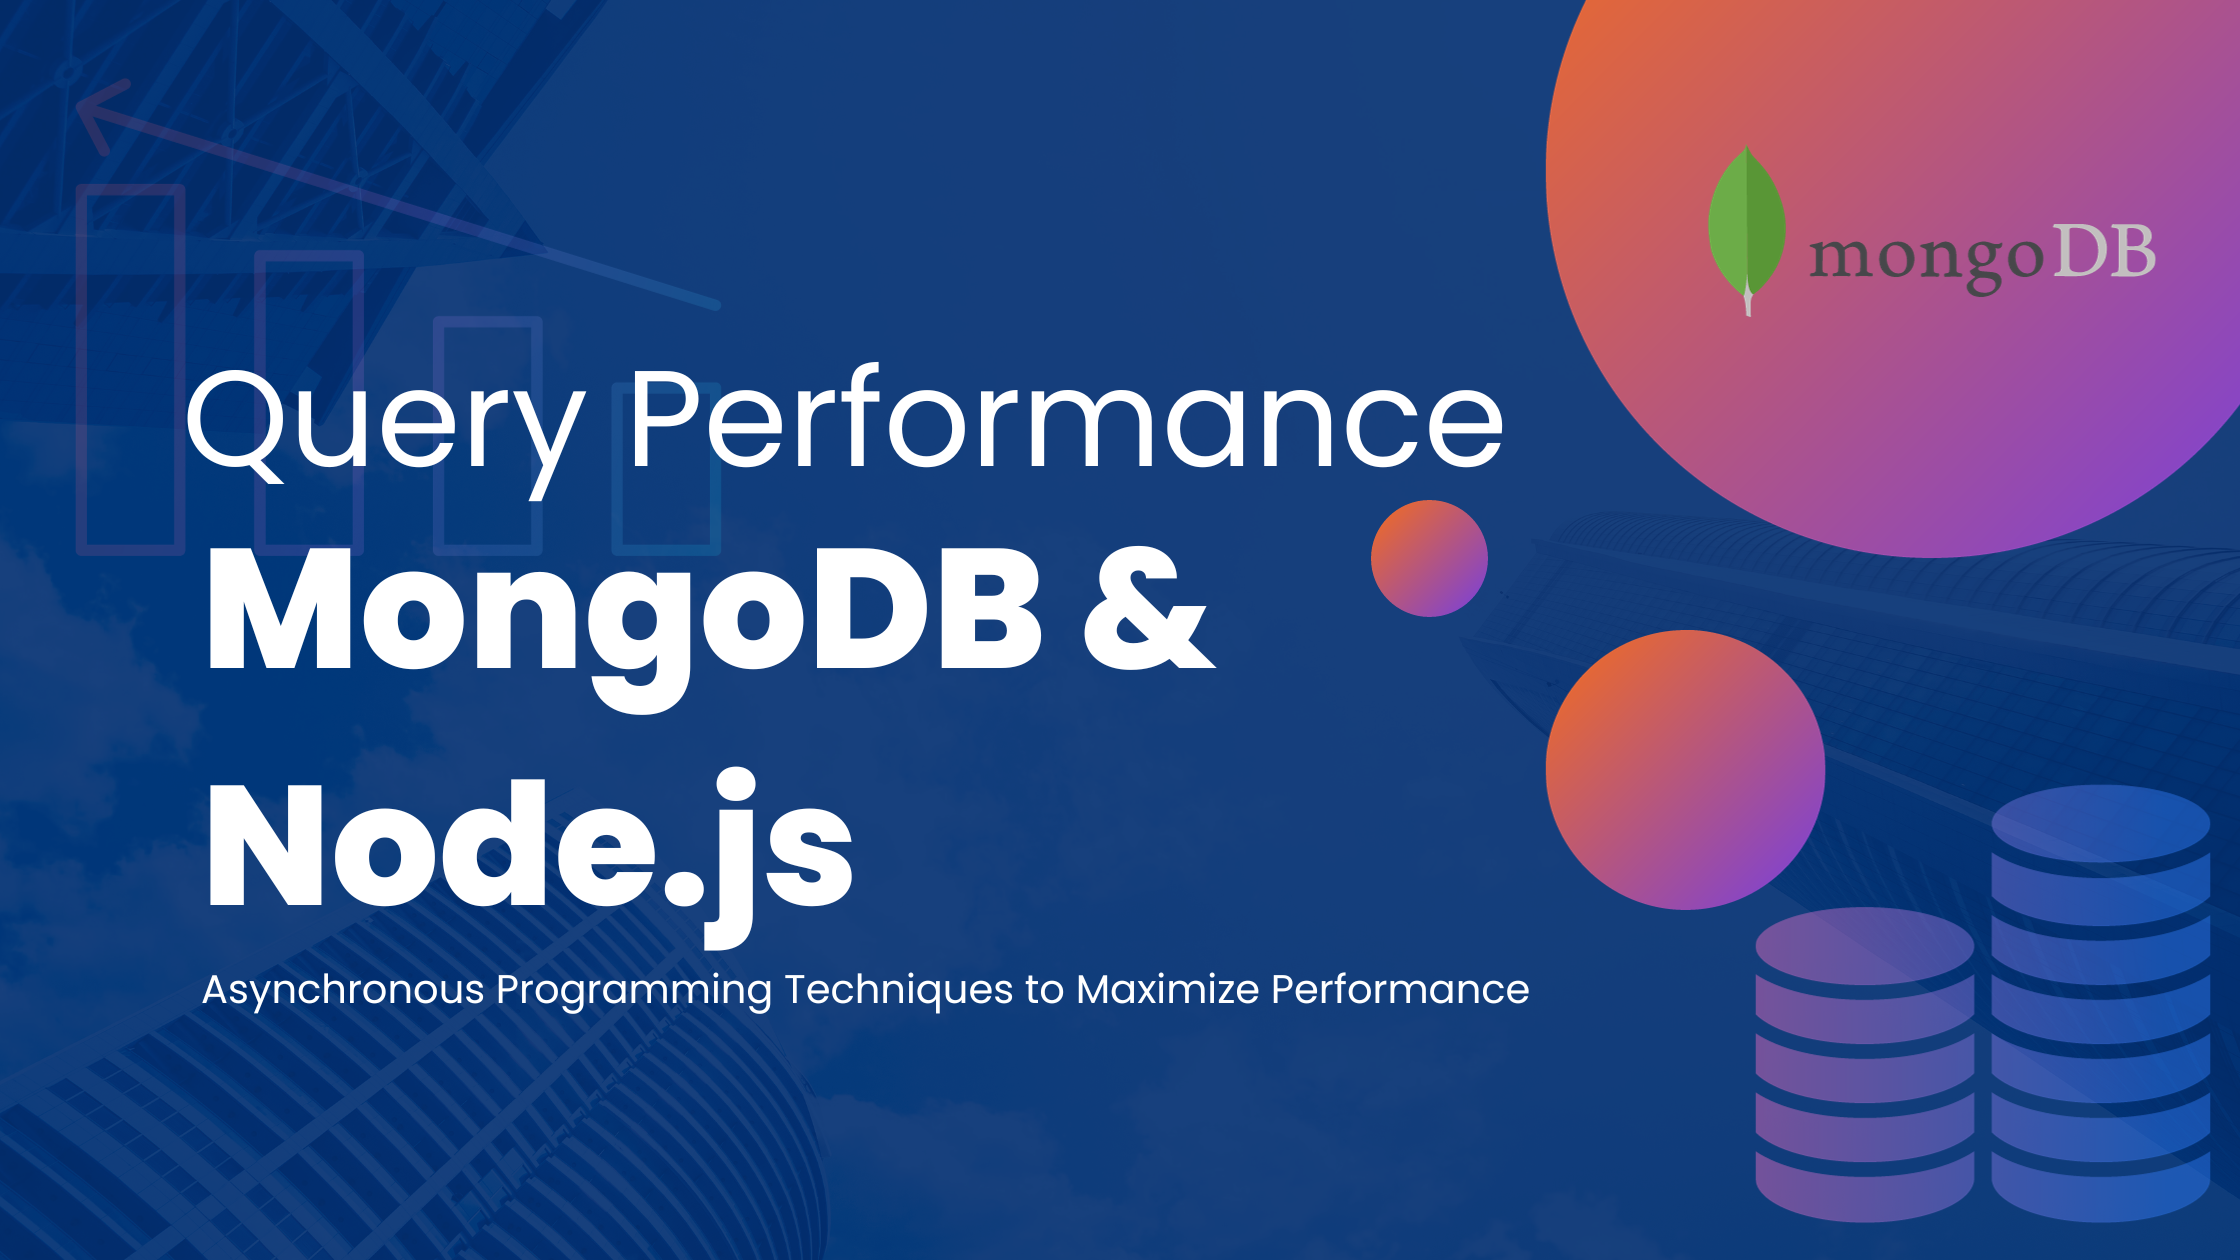 Handling MongoDB Queries with Async/Await and Promises, and Maximizing Performance in Node.js